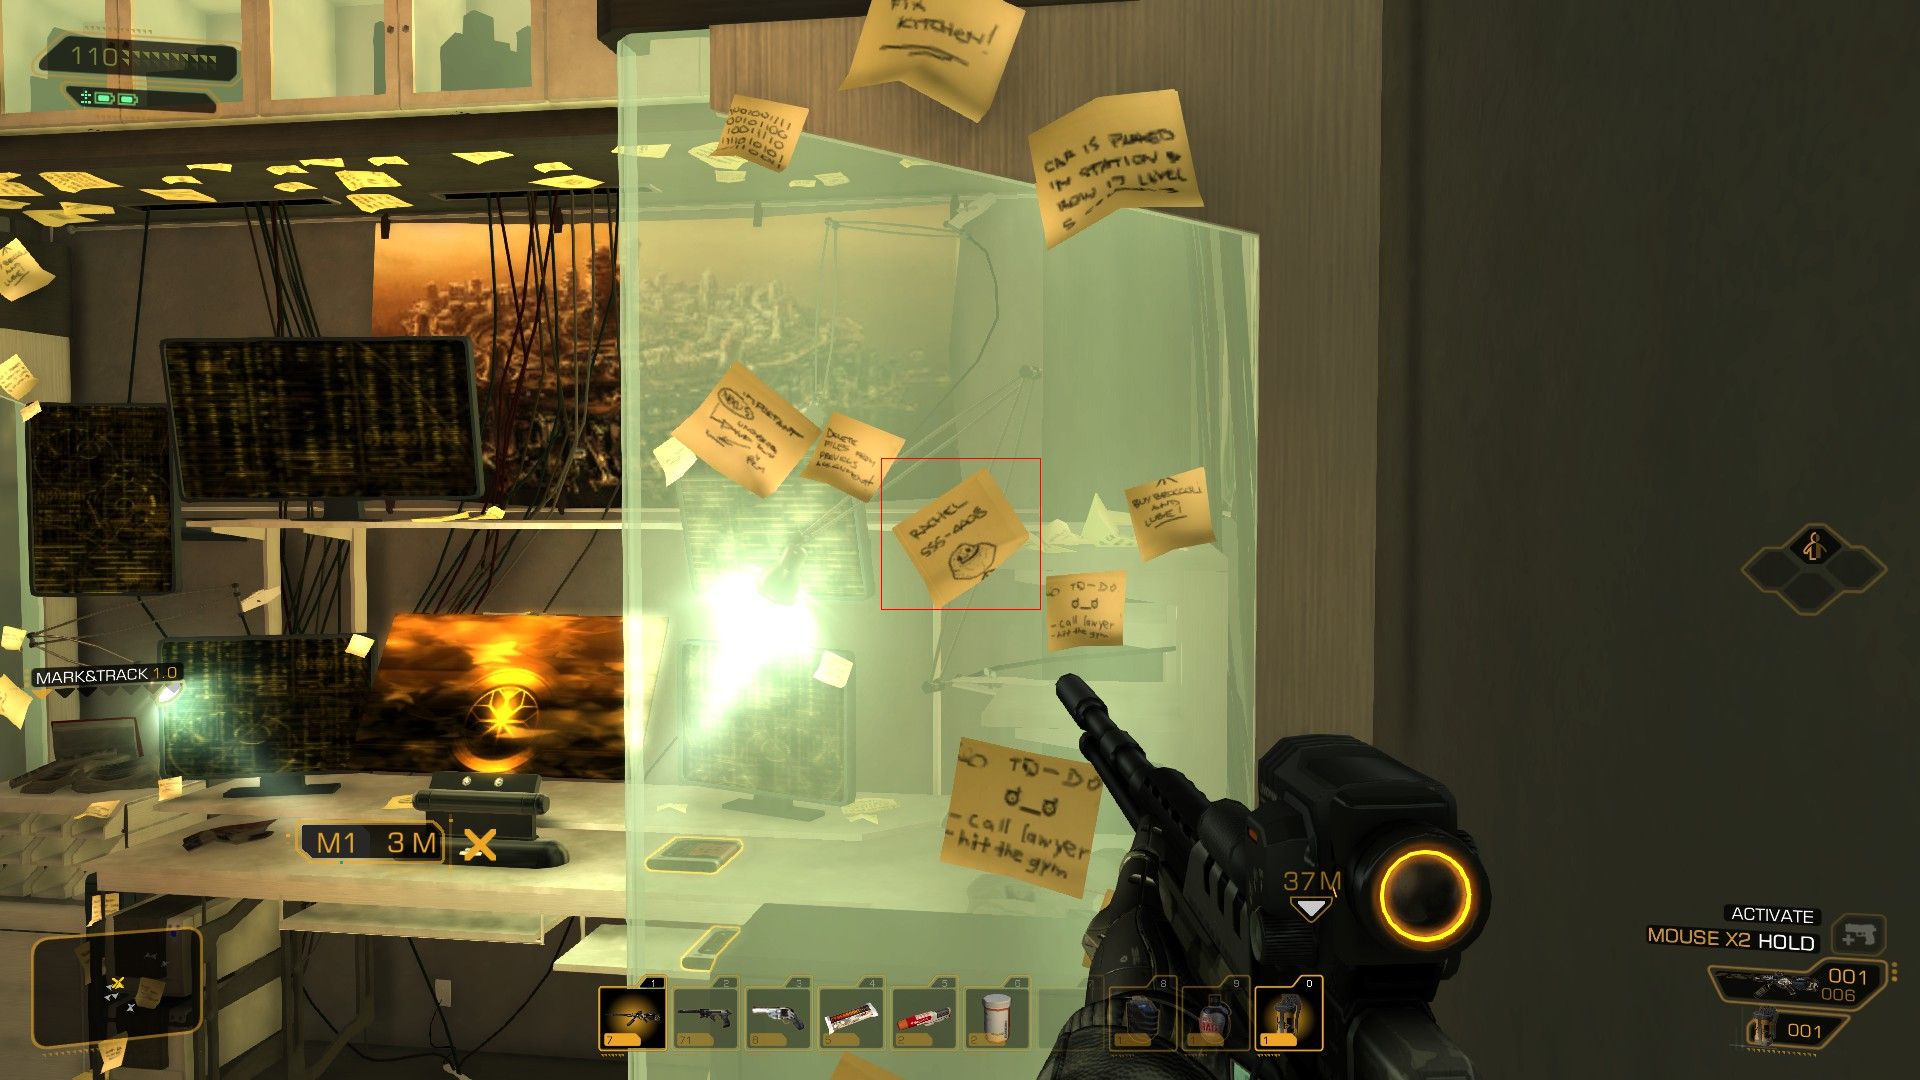 Found a lonely hacker's room in Deus Ex 3 and thought it was funny.